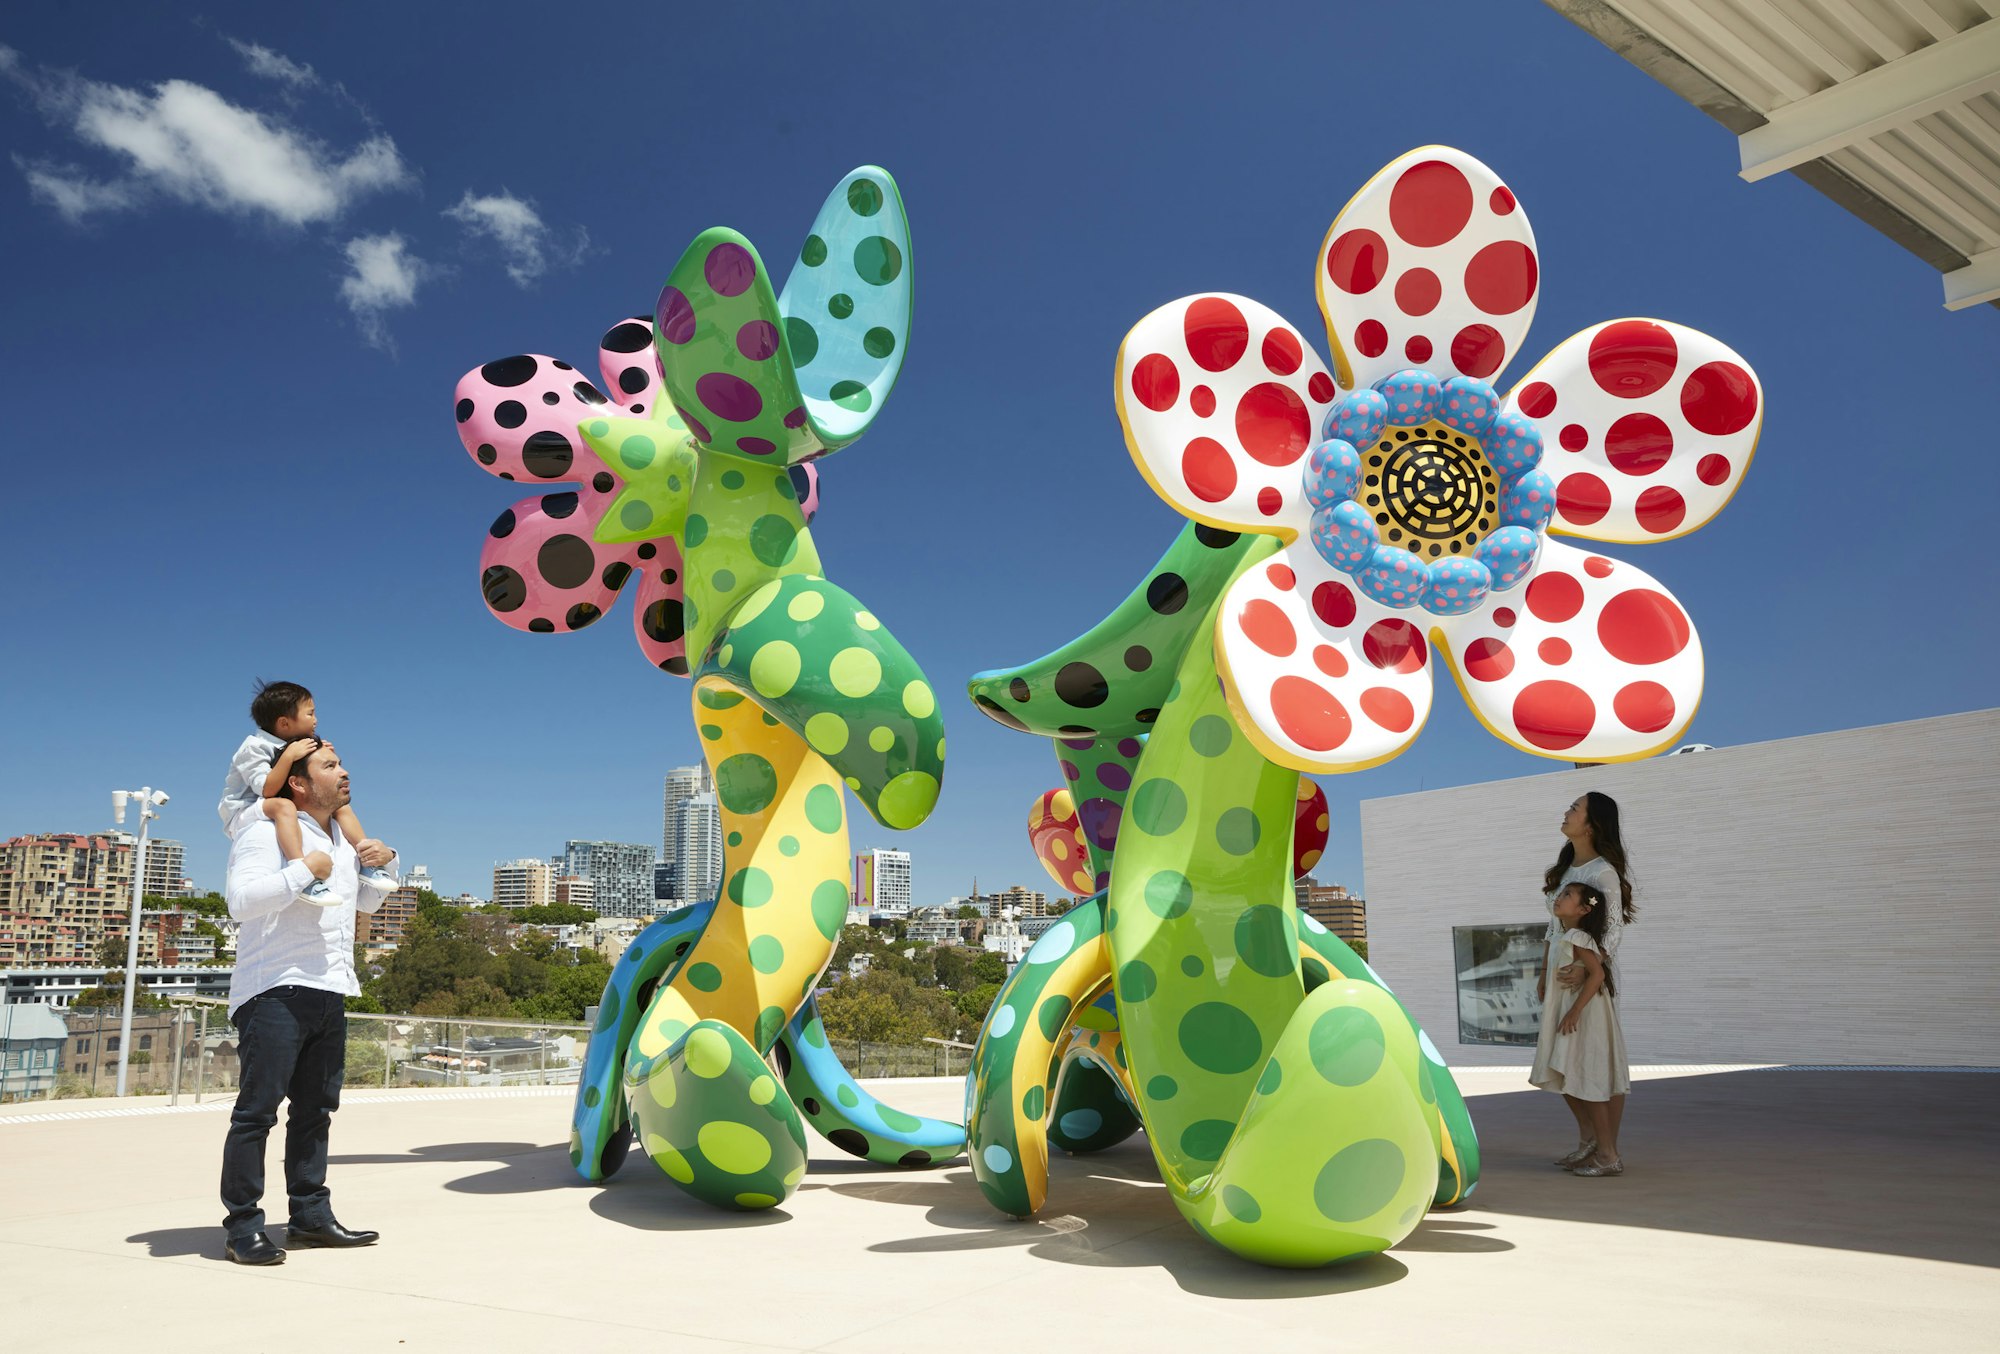 Four people look at a colourful sculpture of flowers with spots on an outdoor terrace